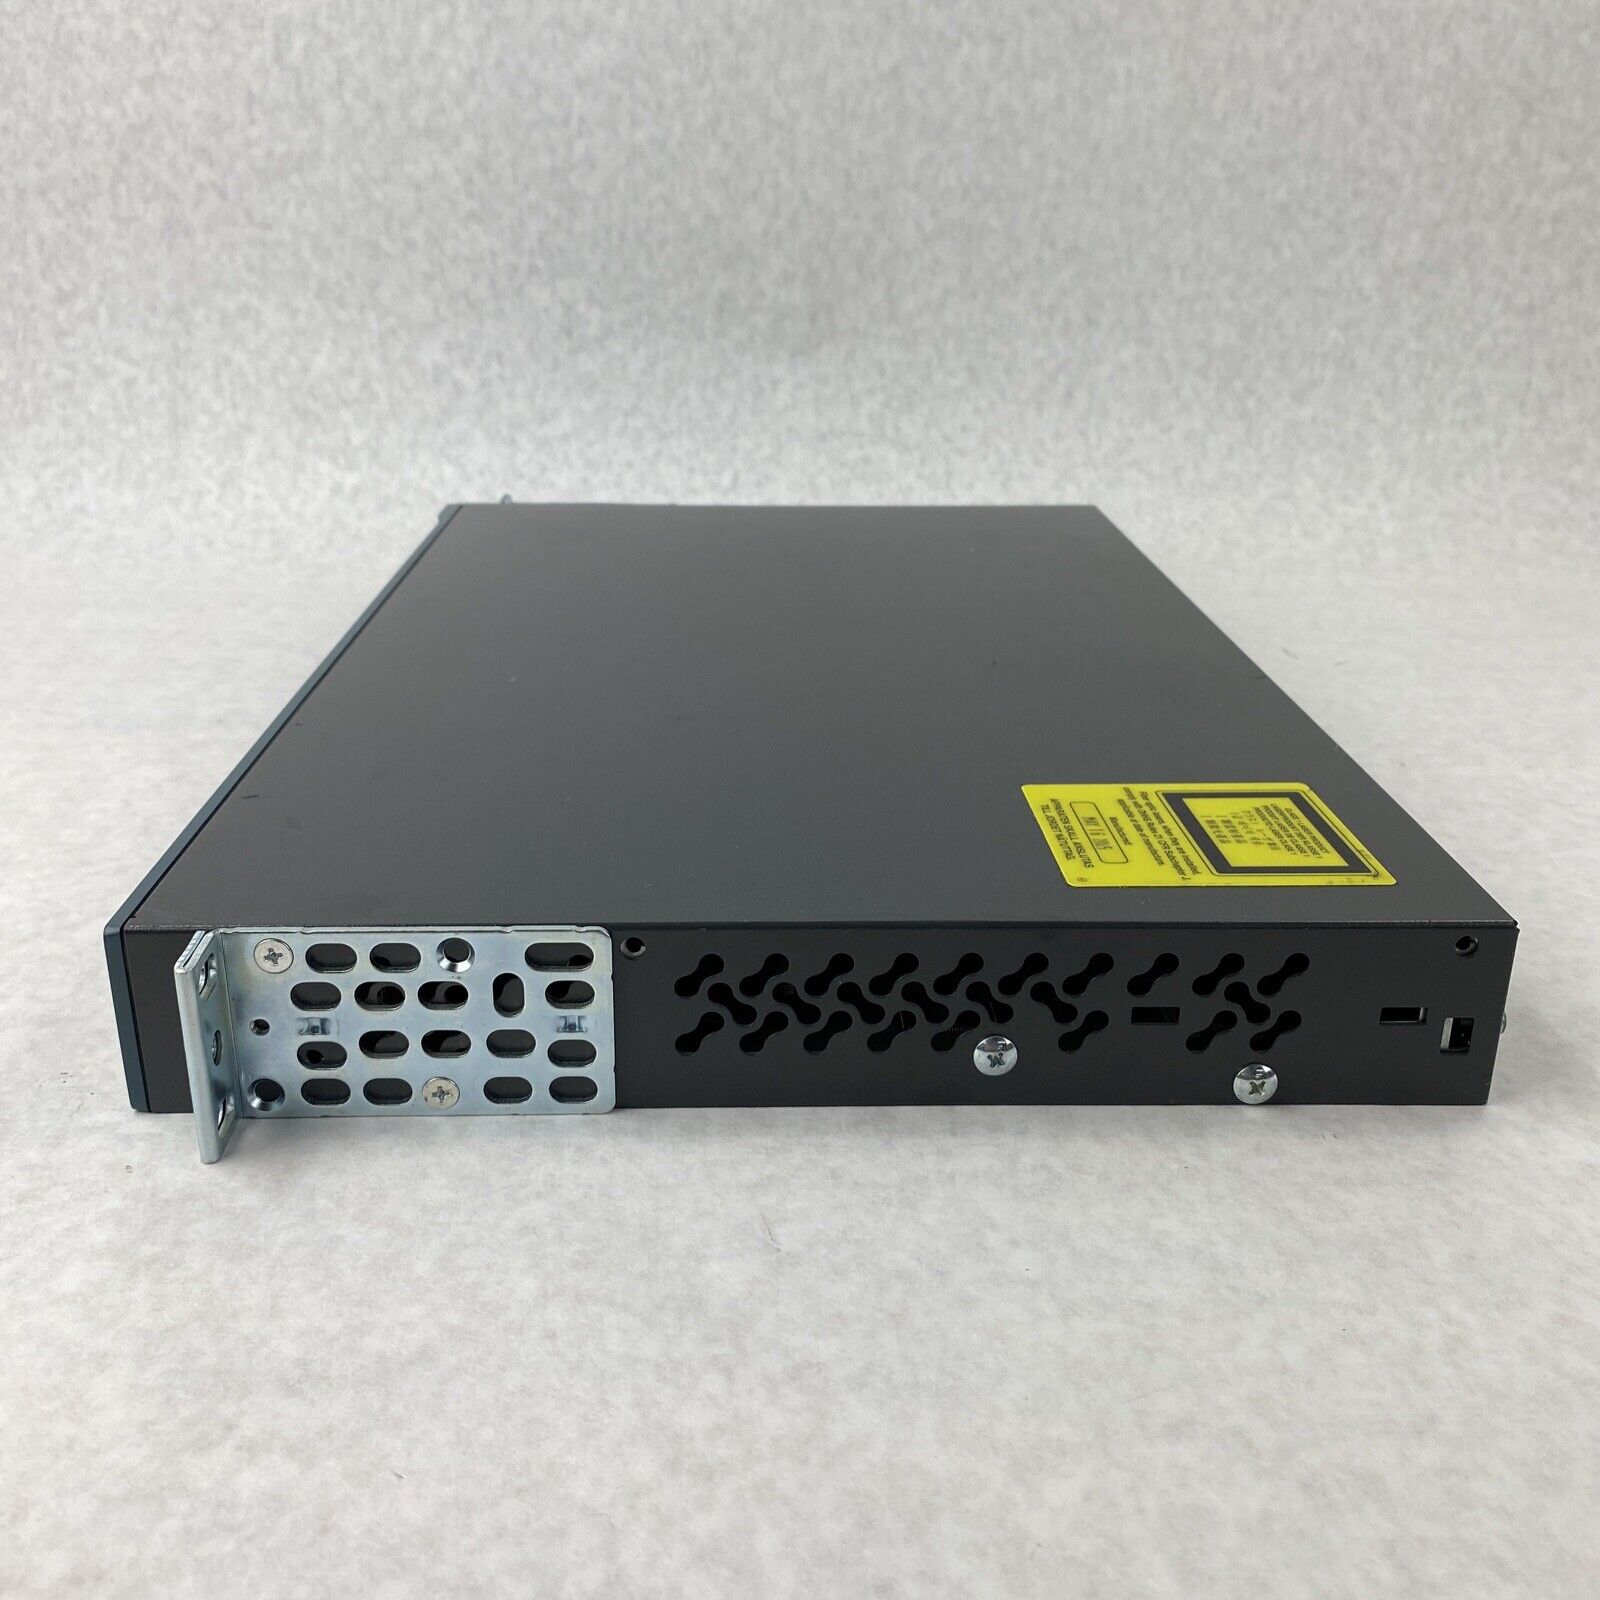 Cisco Catalyst 3560 Series 24 PoE WS-C3560-24PS-S 24-Port Networking Switch